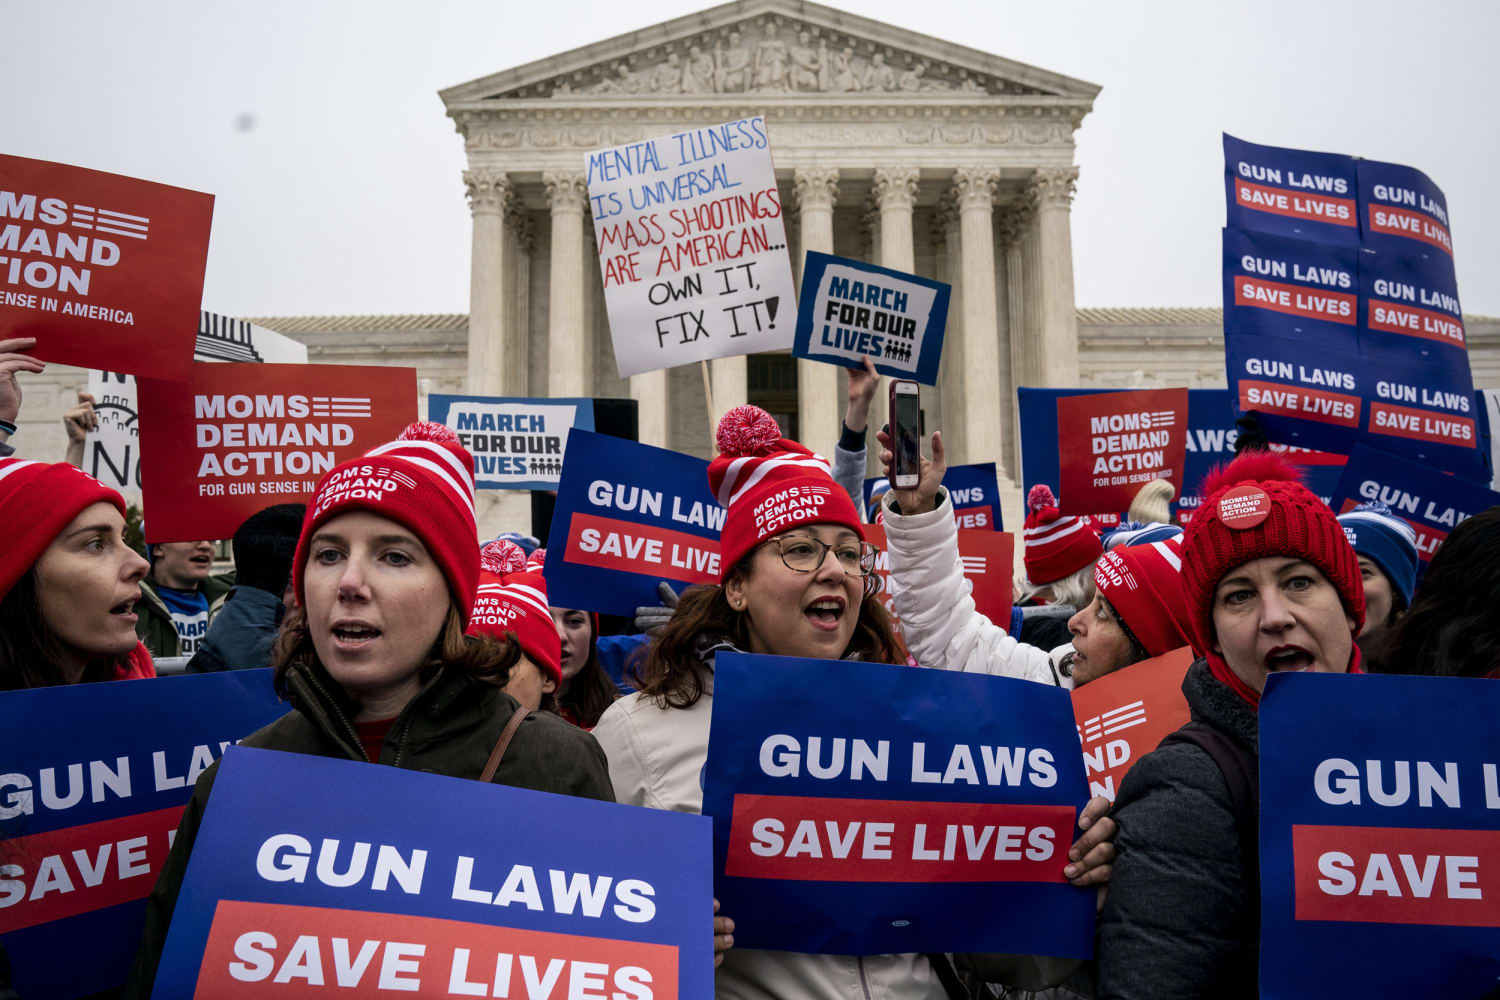 Abuse victims say gun surrender laws save lives. Will the Supreme Court  agree? - ABC News